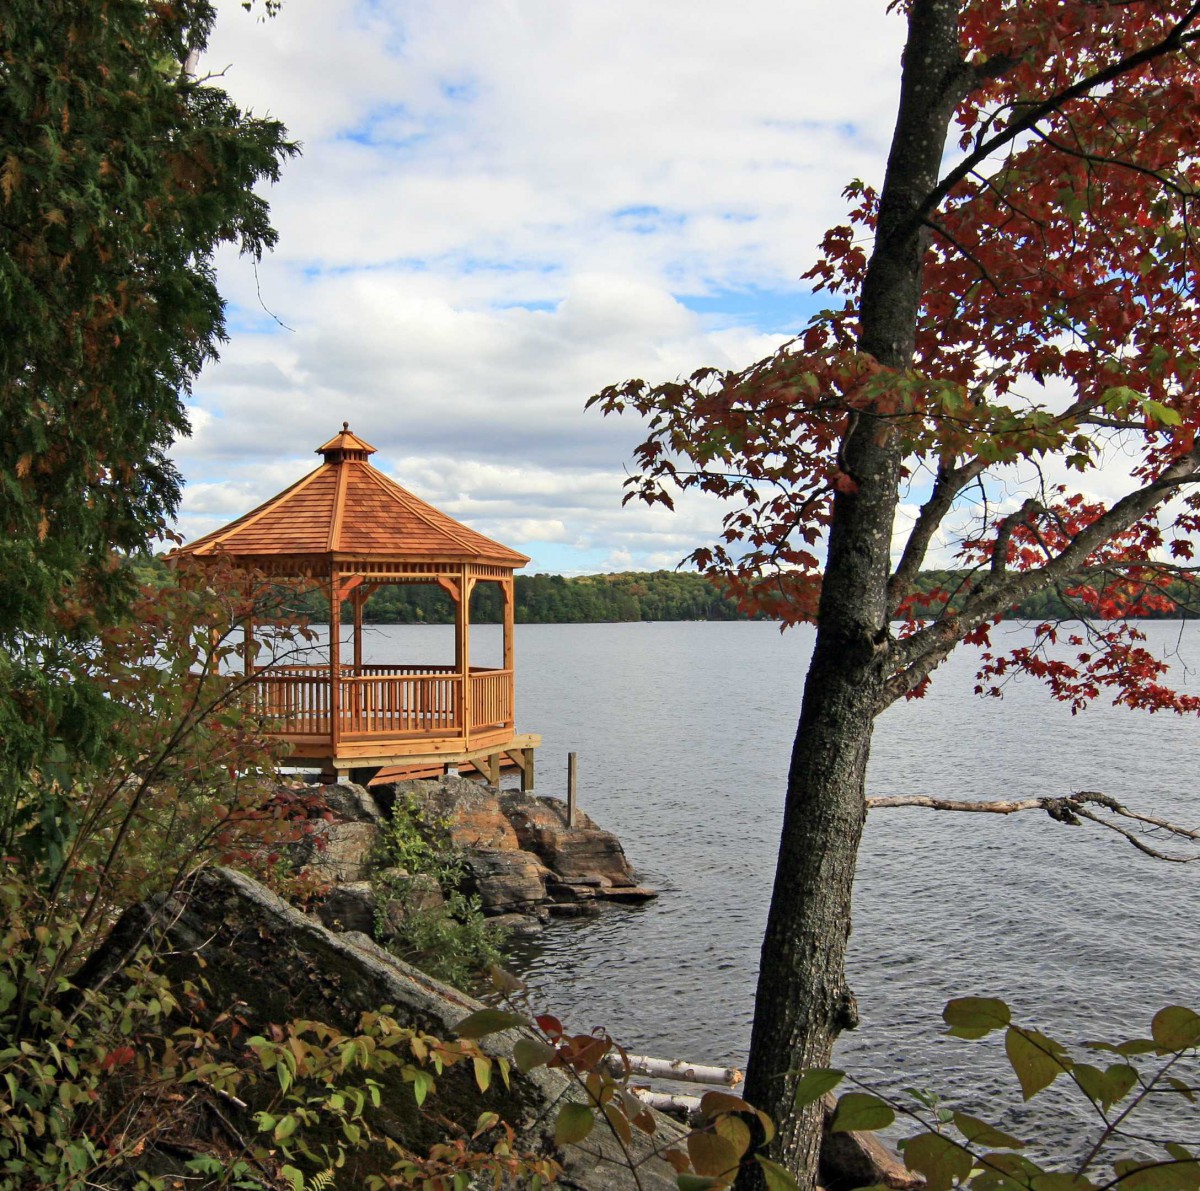 Lakeside Monterey gazebo plan 14' in Minden, Ontario seen from the right 2. ID number 3121